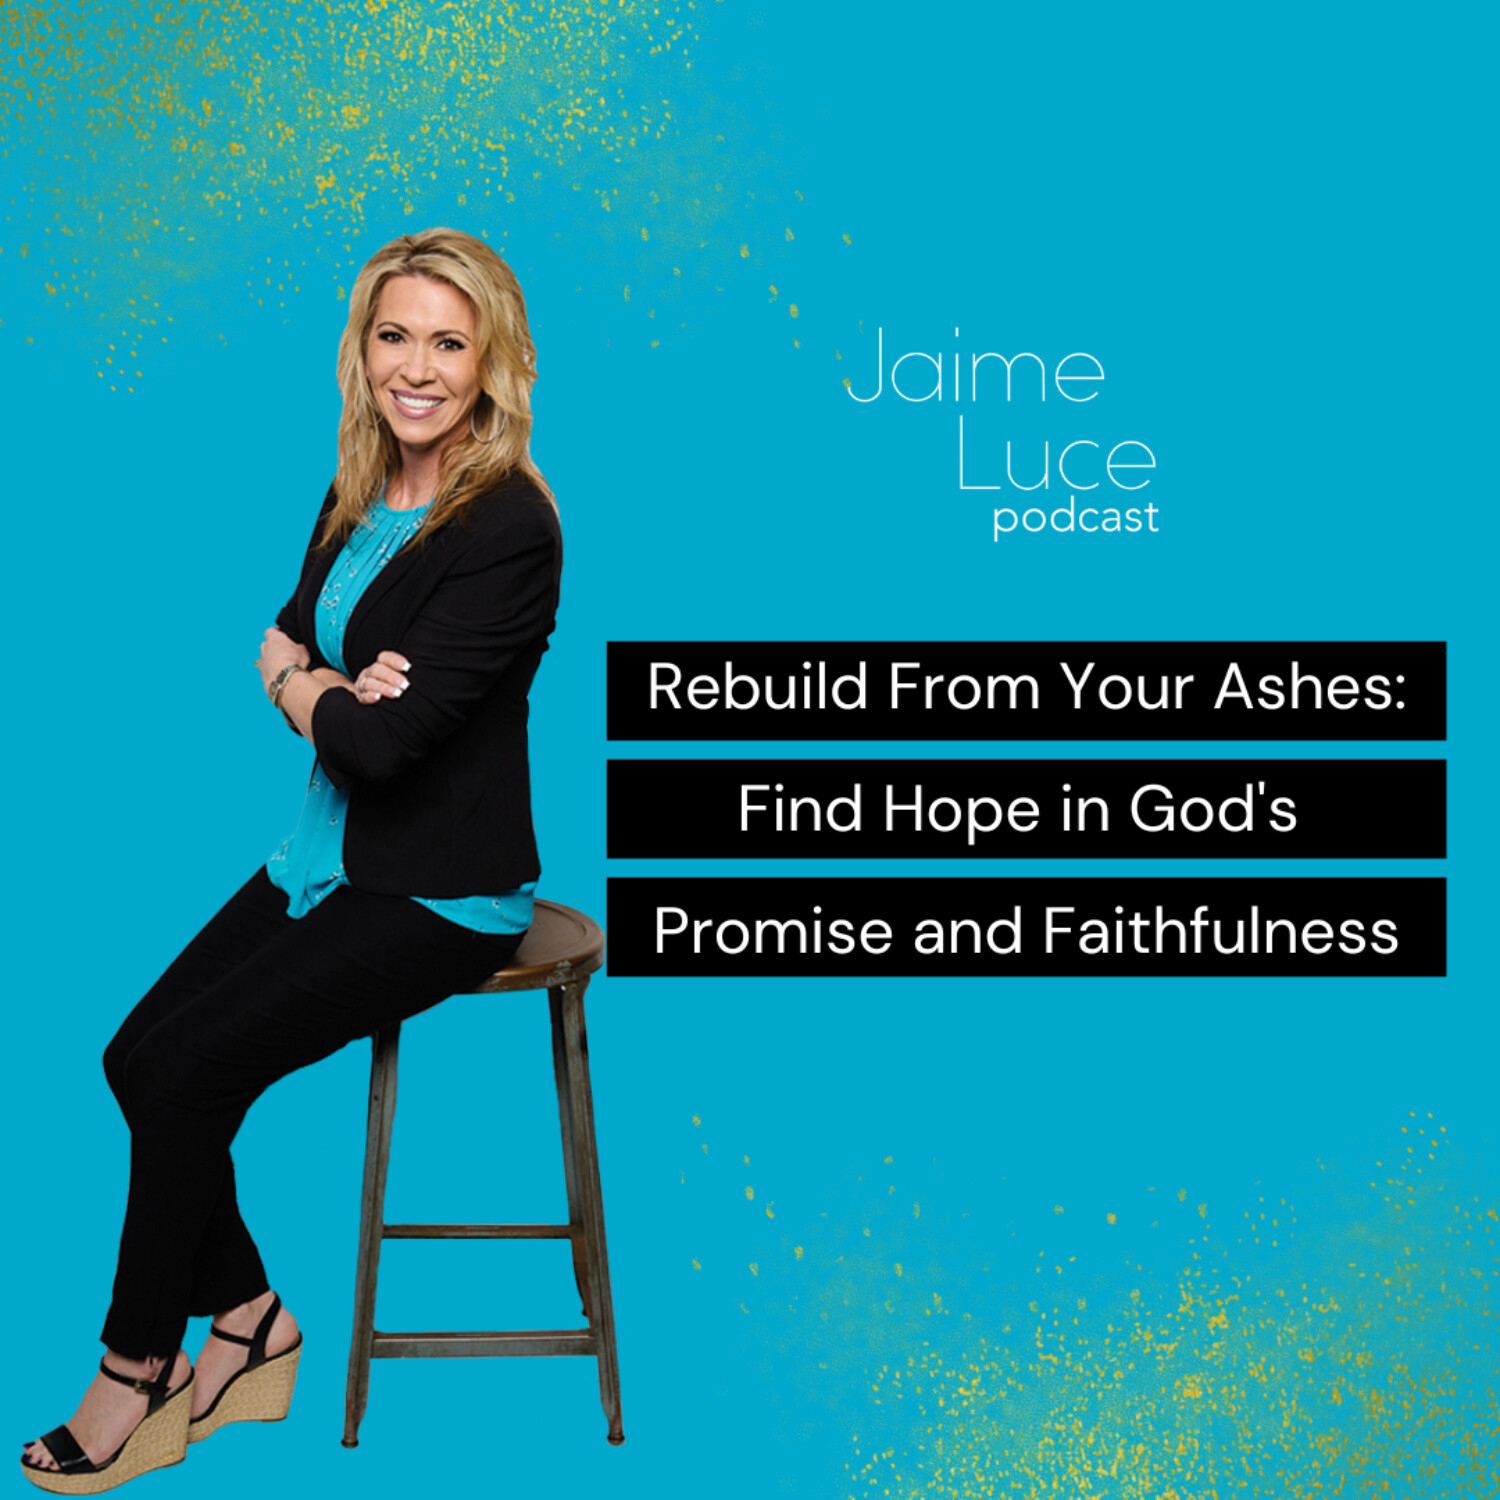 Rebuild From Your Ashes: Find Hope in God's Promise and Faithfulness